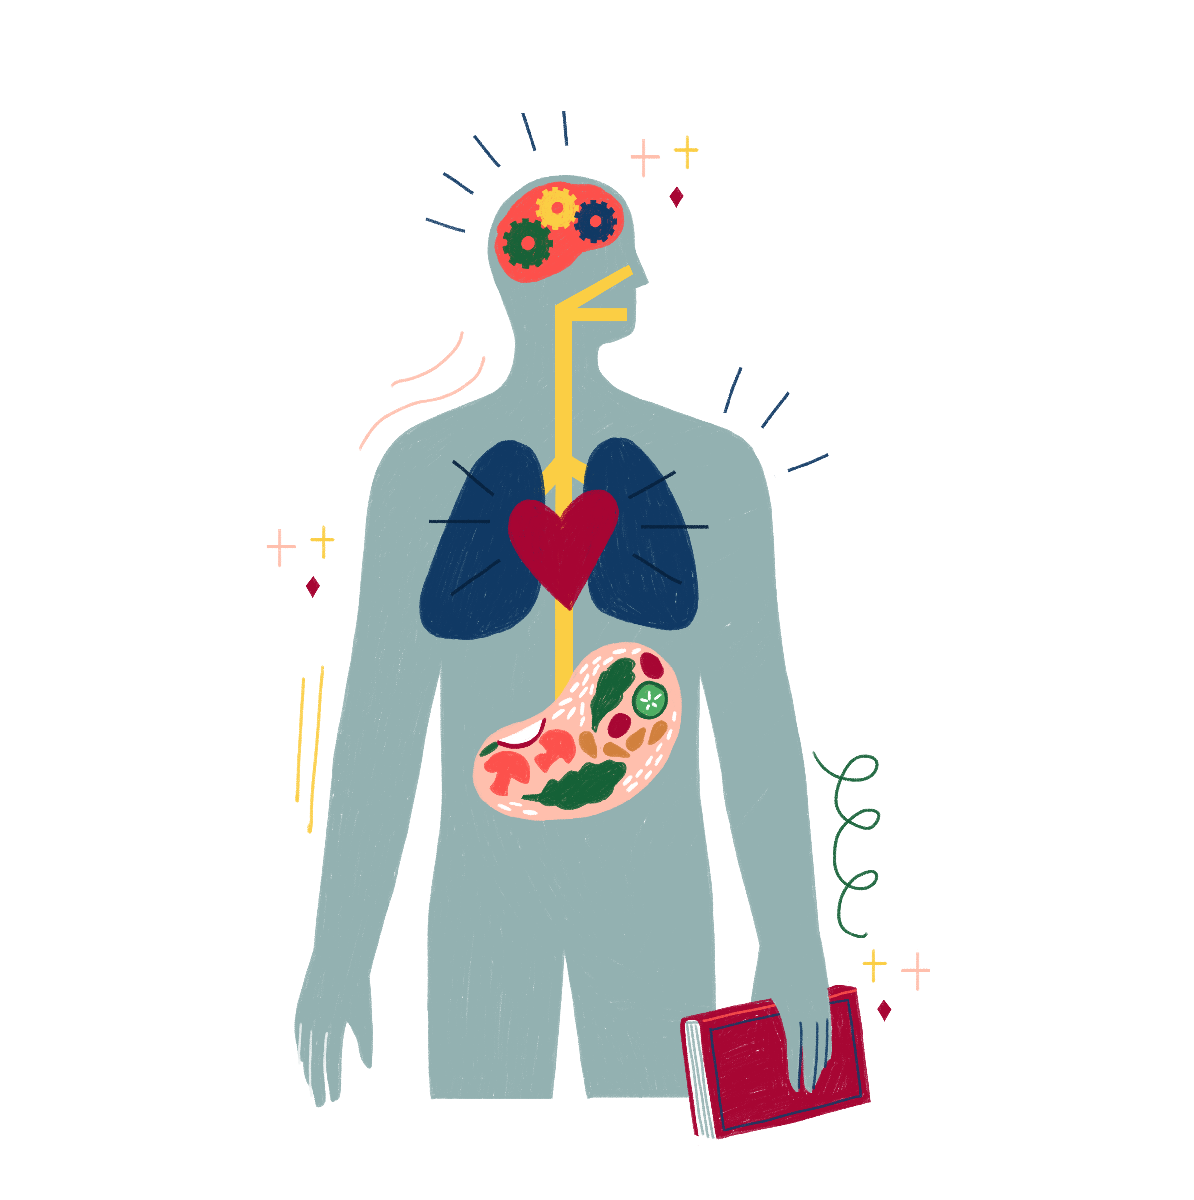 Illustrated diagram of stomach and body health